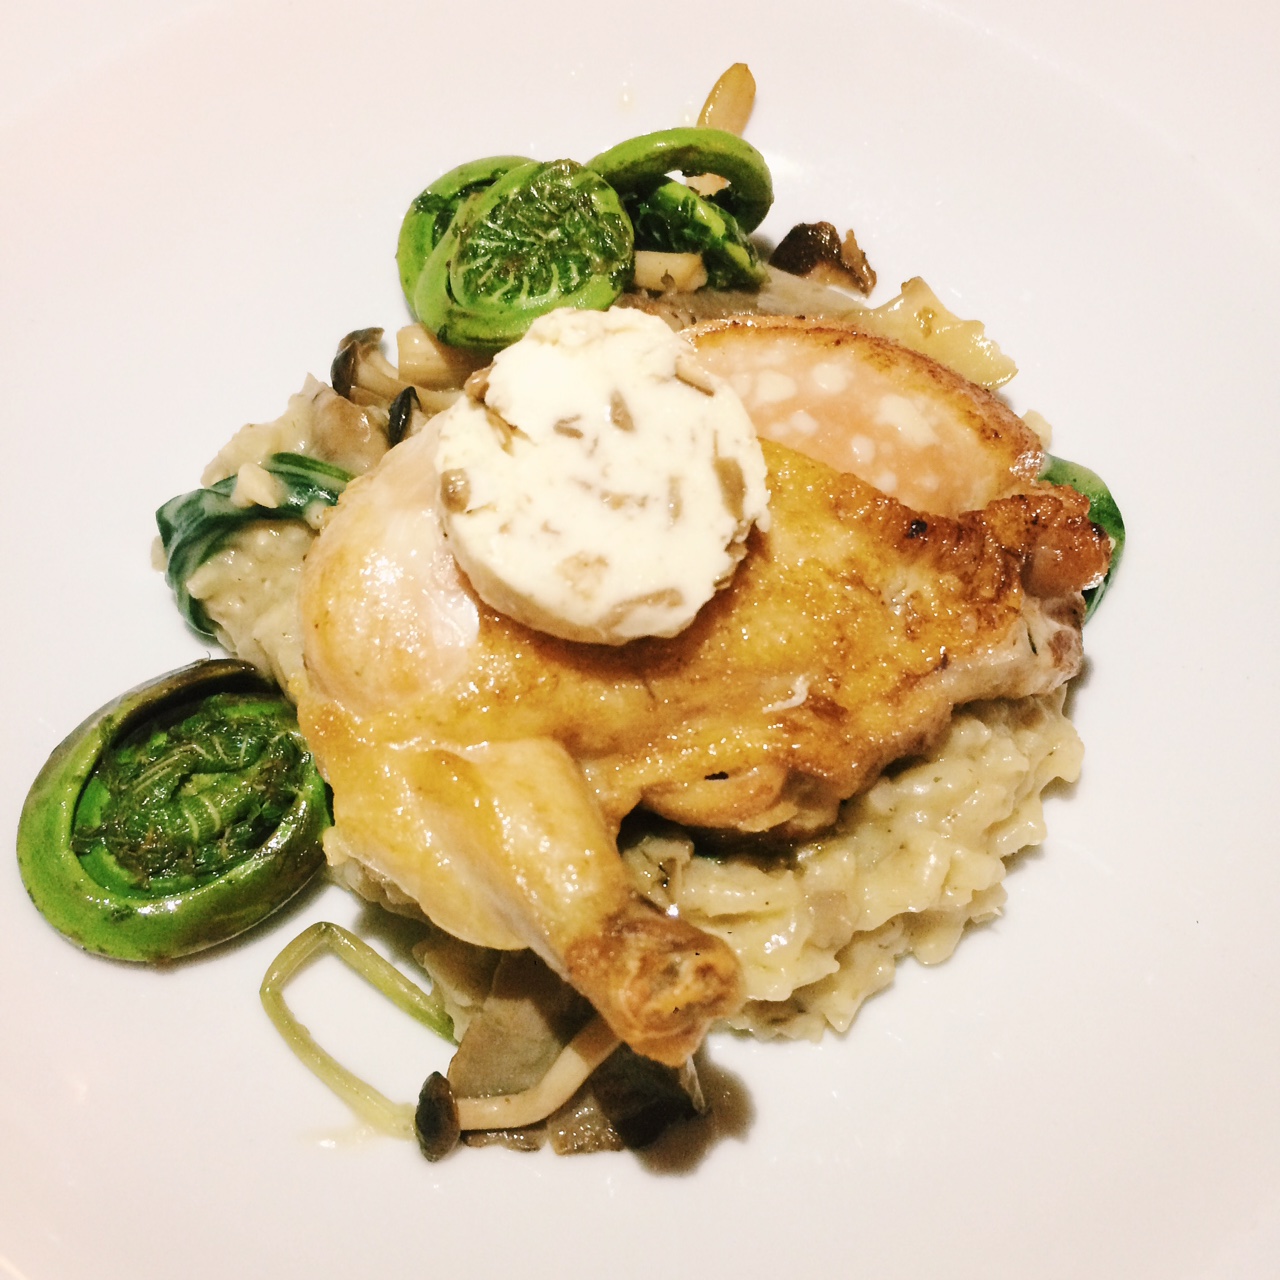 Chicken thigh and fiddleheads